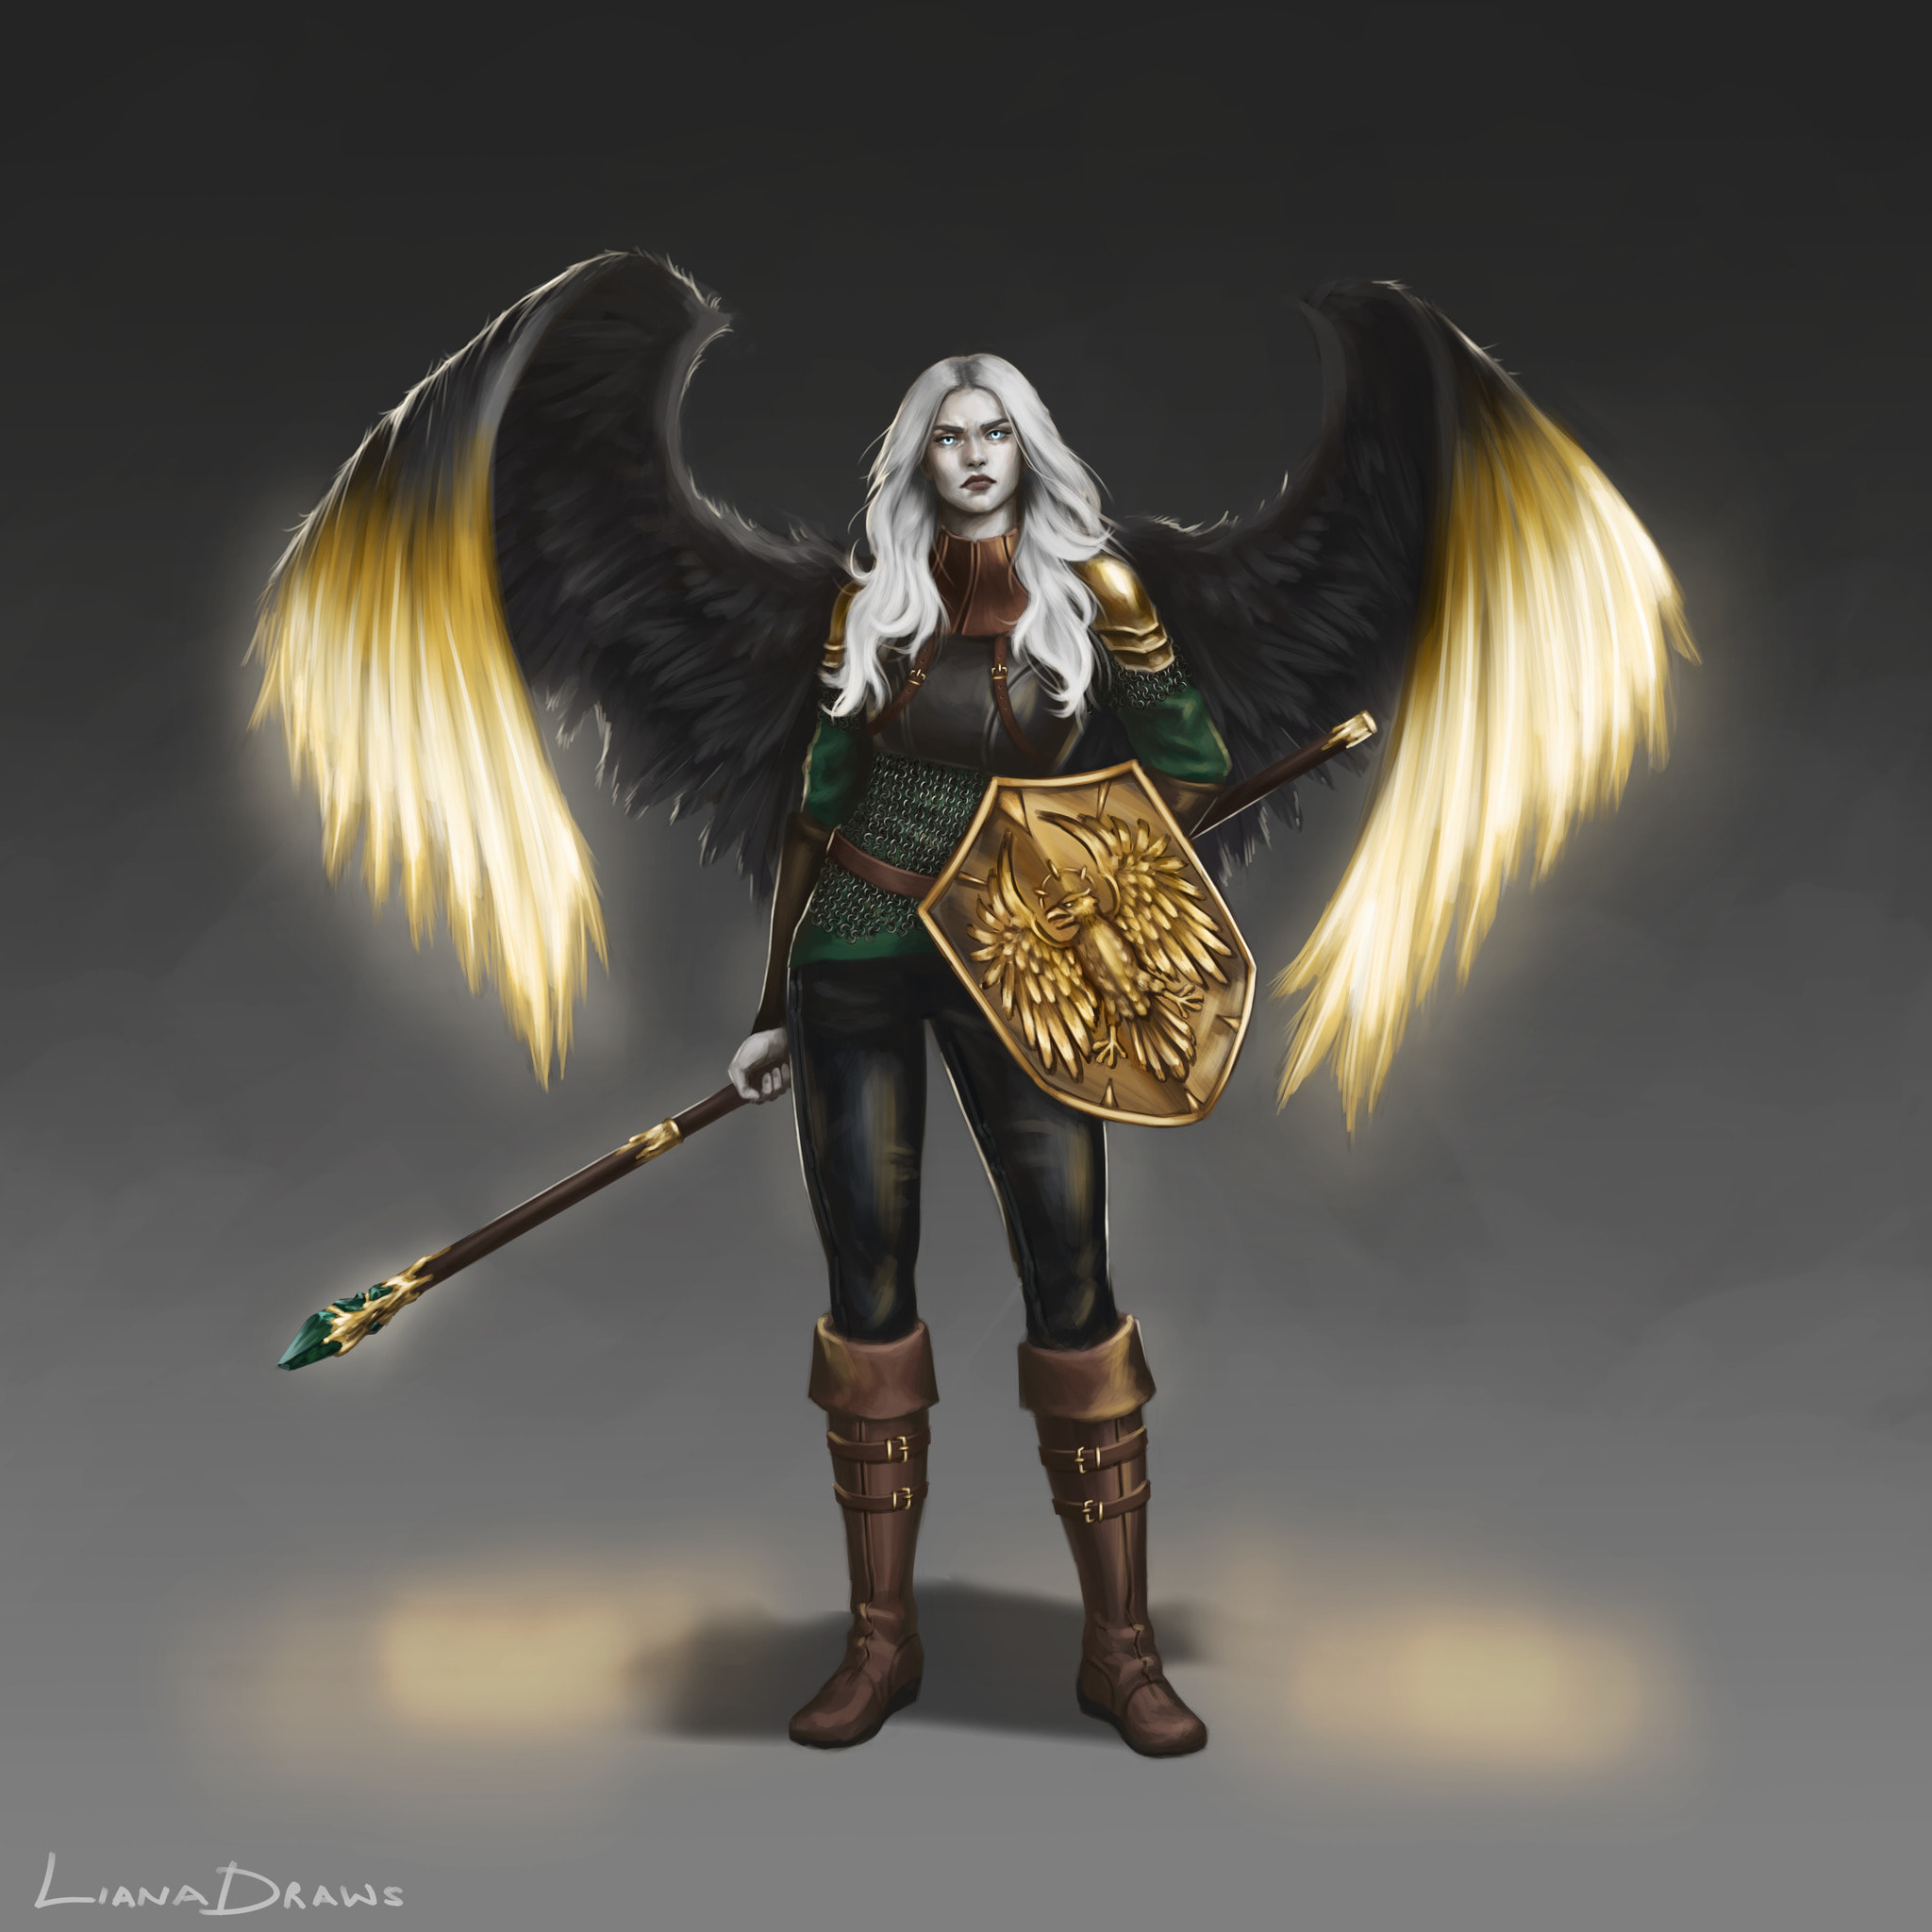 Liana Draws female aasimar sorceress with wings out DnD character illustrat...